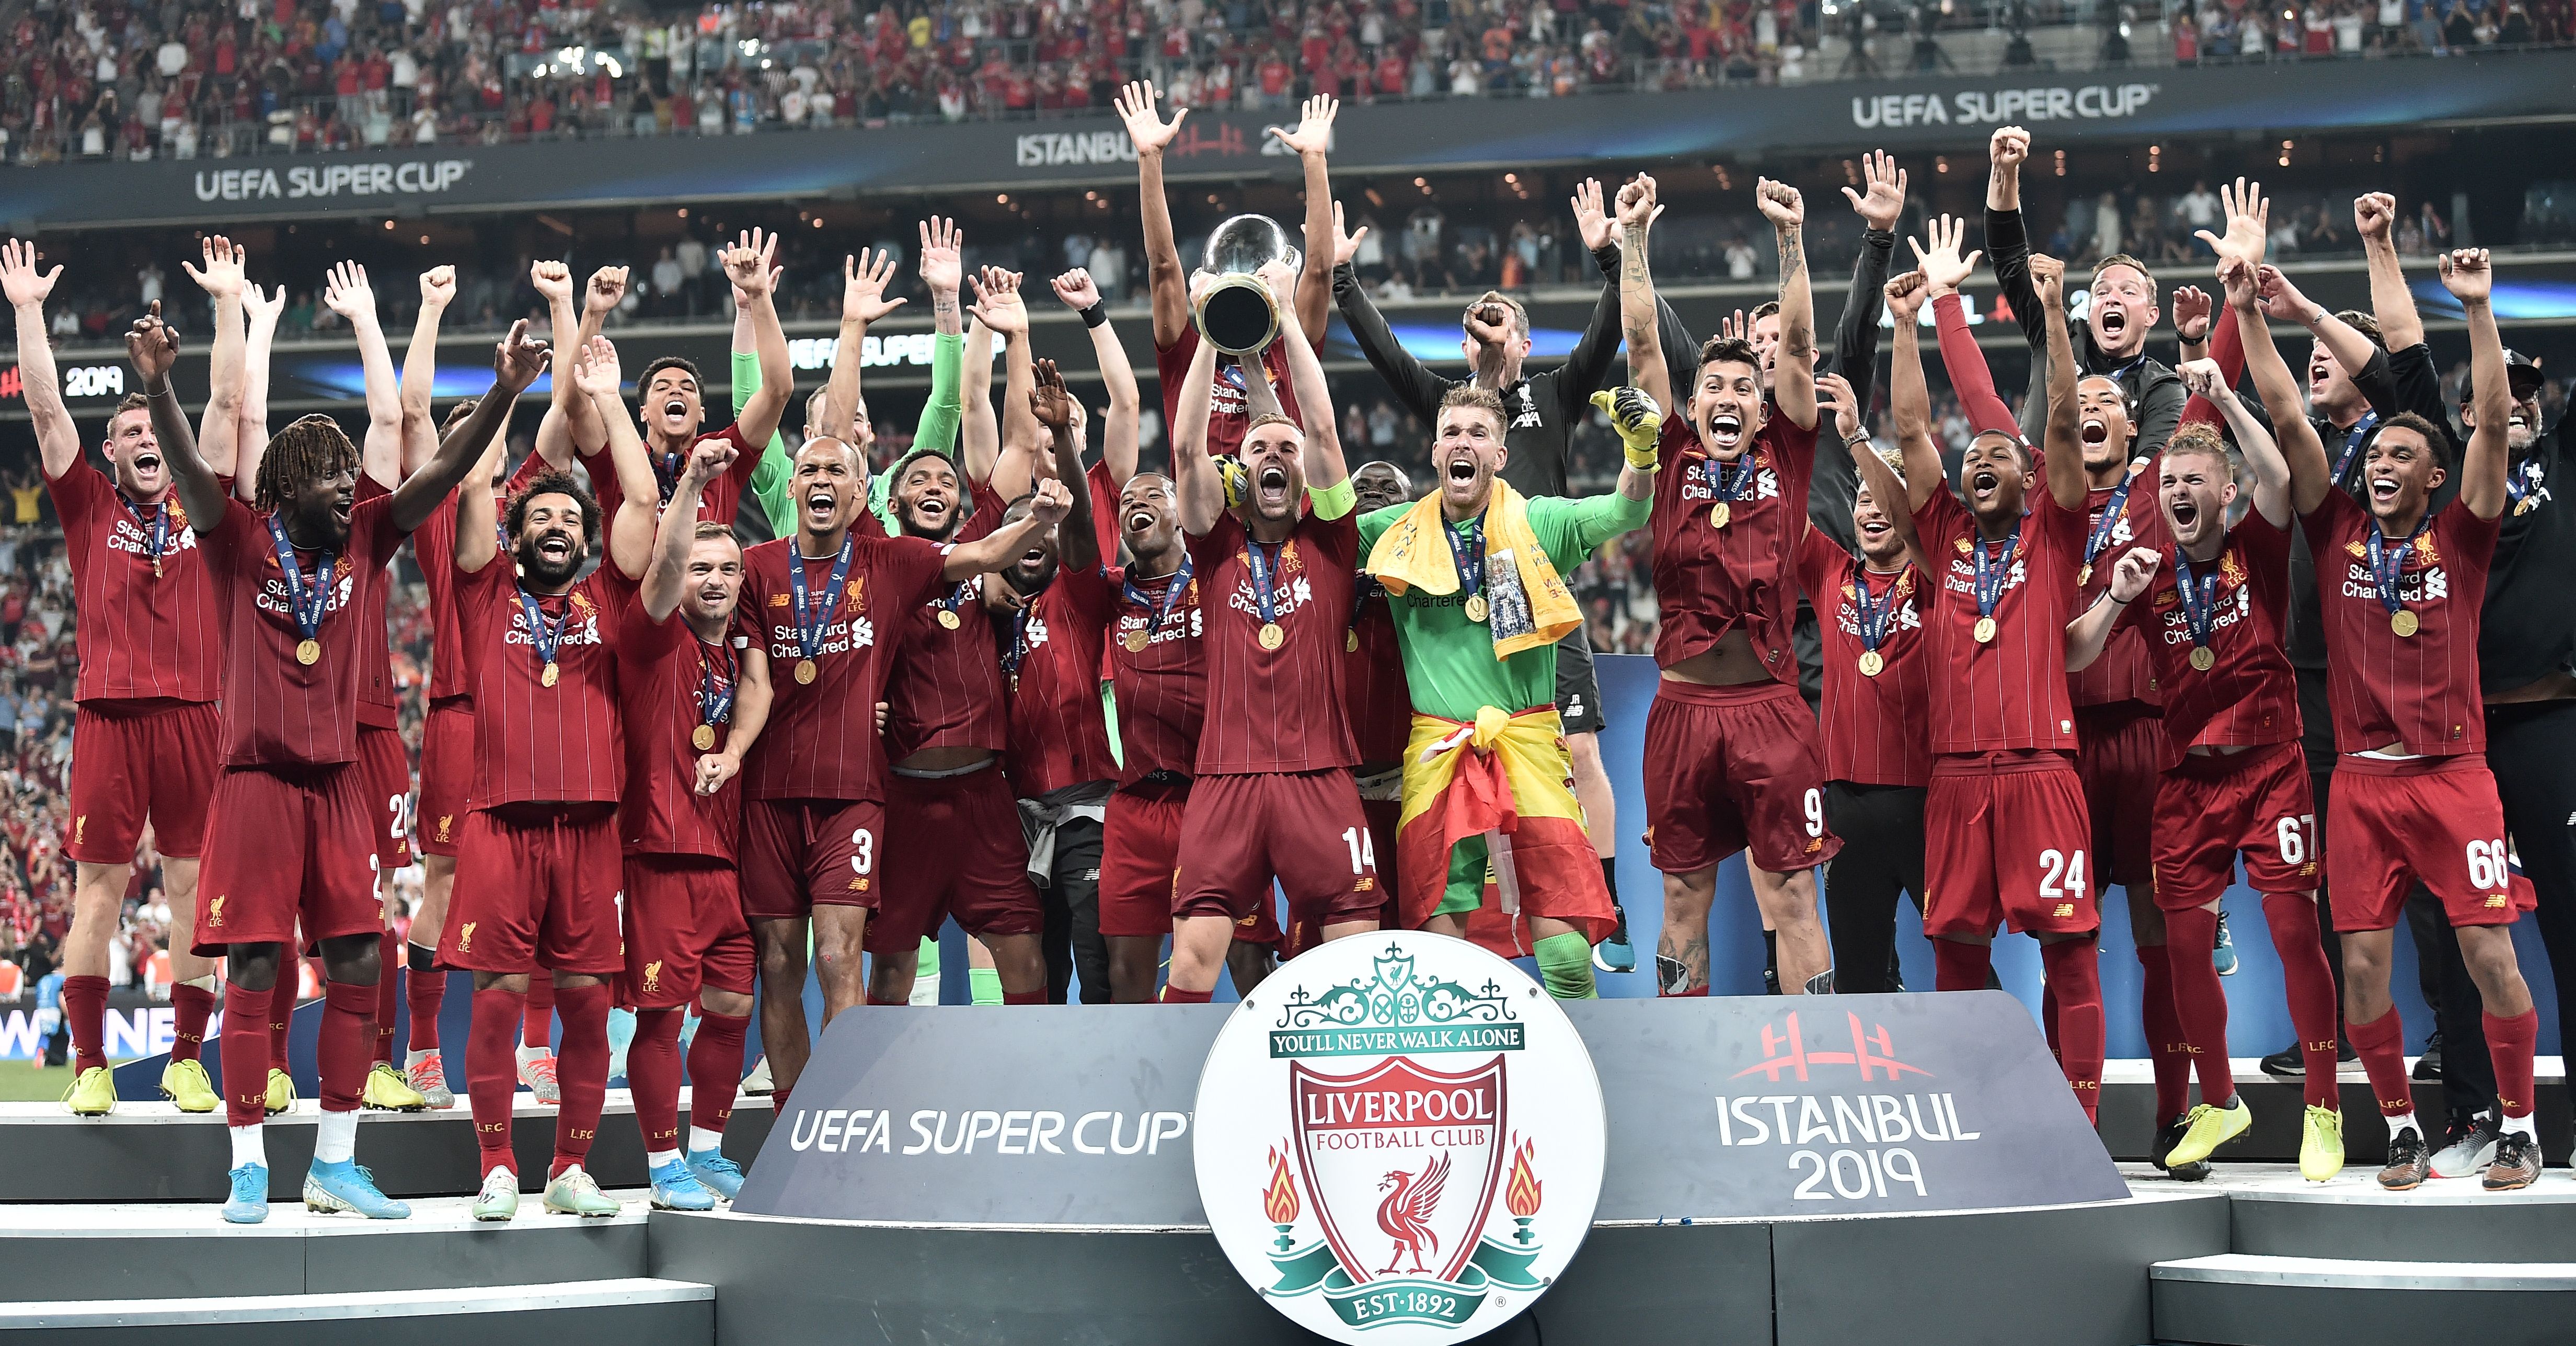 Liverpool team poses with the trophy after winning the UEFA Super Cup 2019 football match between FC Liverpool and FC Chelsea at Besiktas Park Stadium in Istanbul on August 14, 2019. (Photo by OZAN KOSE / AFP)        (Photo credit should read OZAN KOSE/AFP/Getty Images)